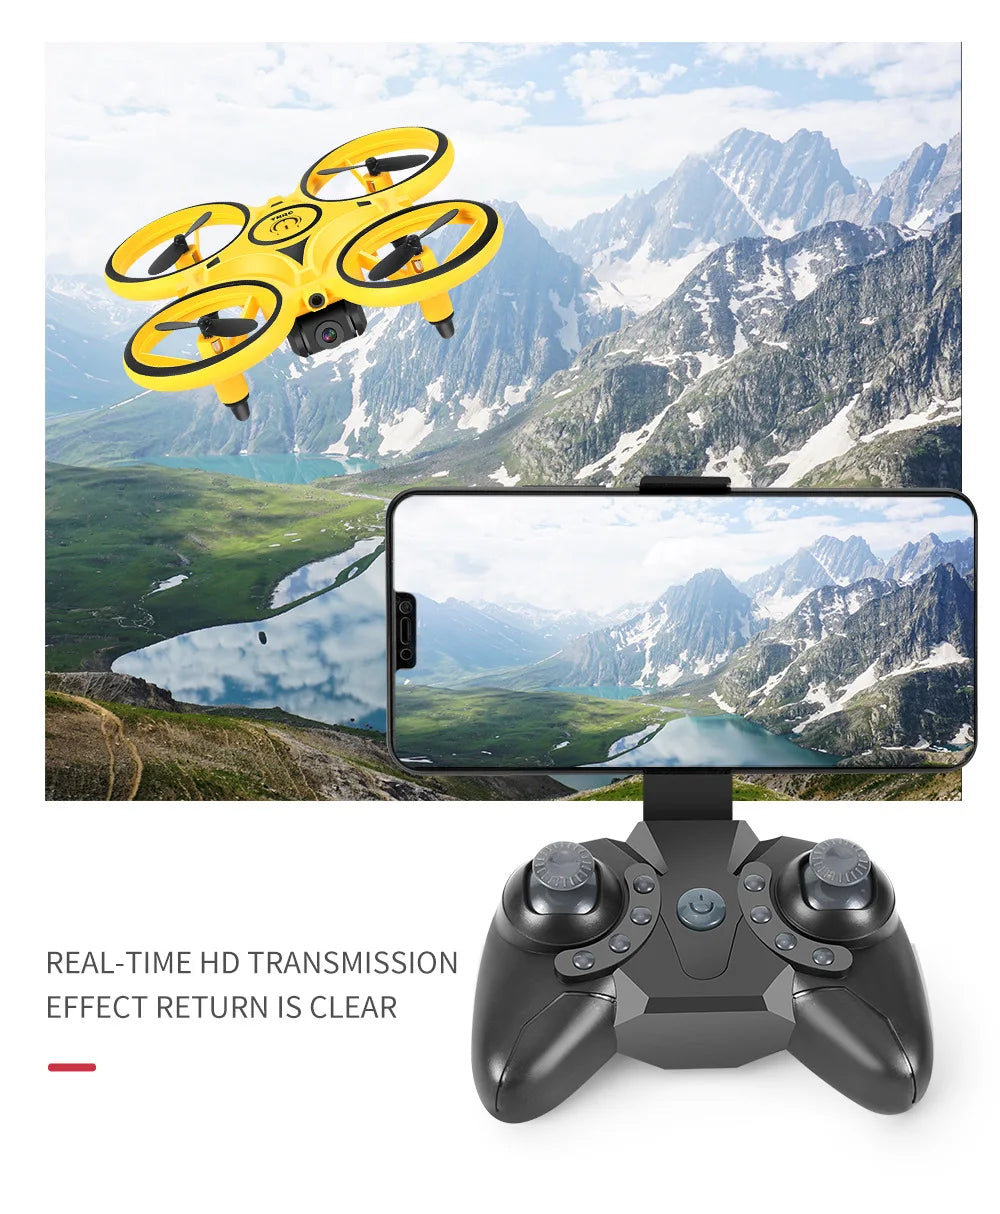 HGRC 2.4G Mini Watch RC Drone, REAL-TIME HD TRANSMISSION EFFECT RETURN IS CL